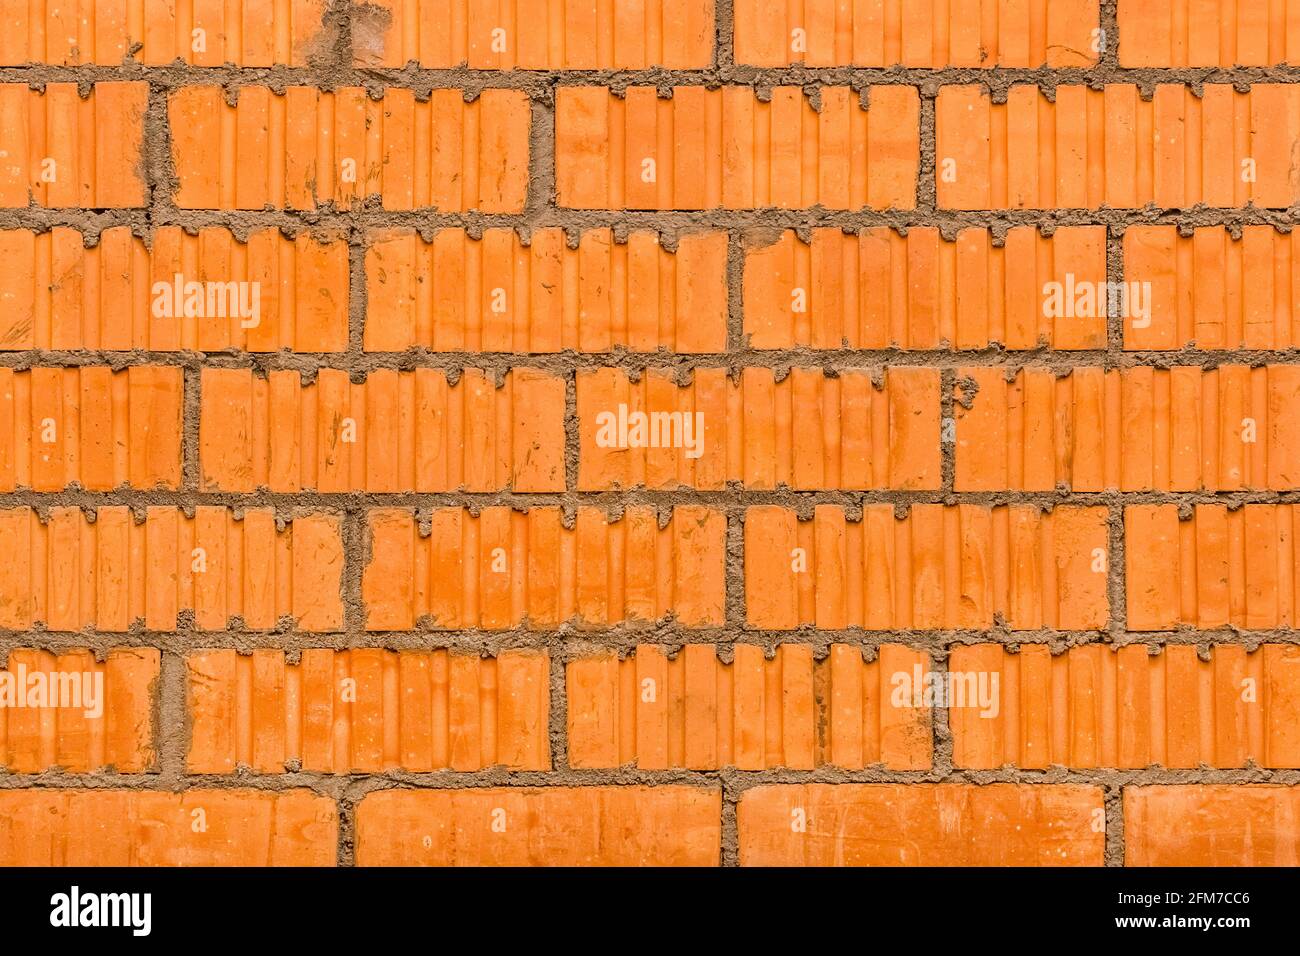 Masonry brown building brick, orange abstract wall texture with blocks construction background. Stock Photo